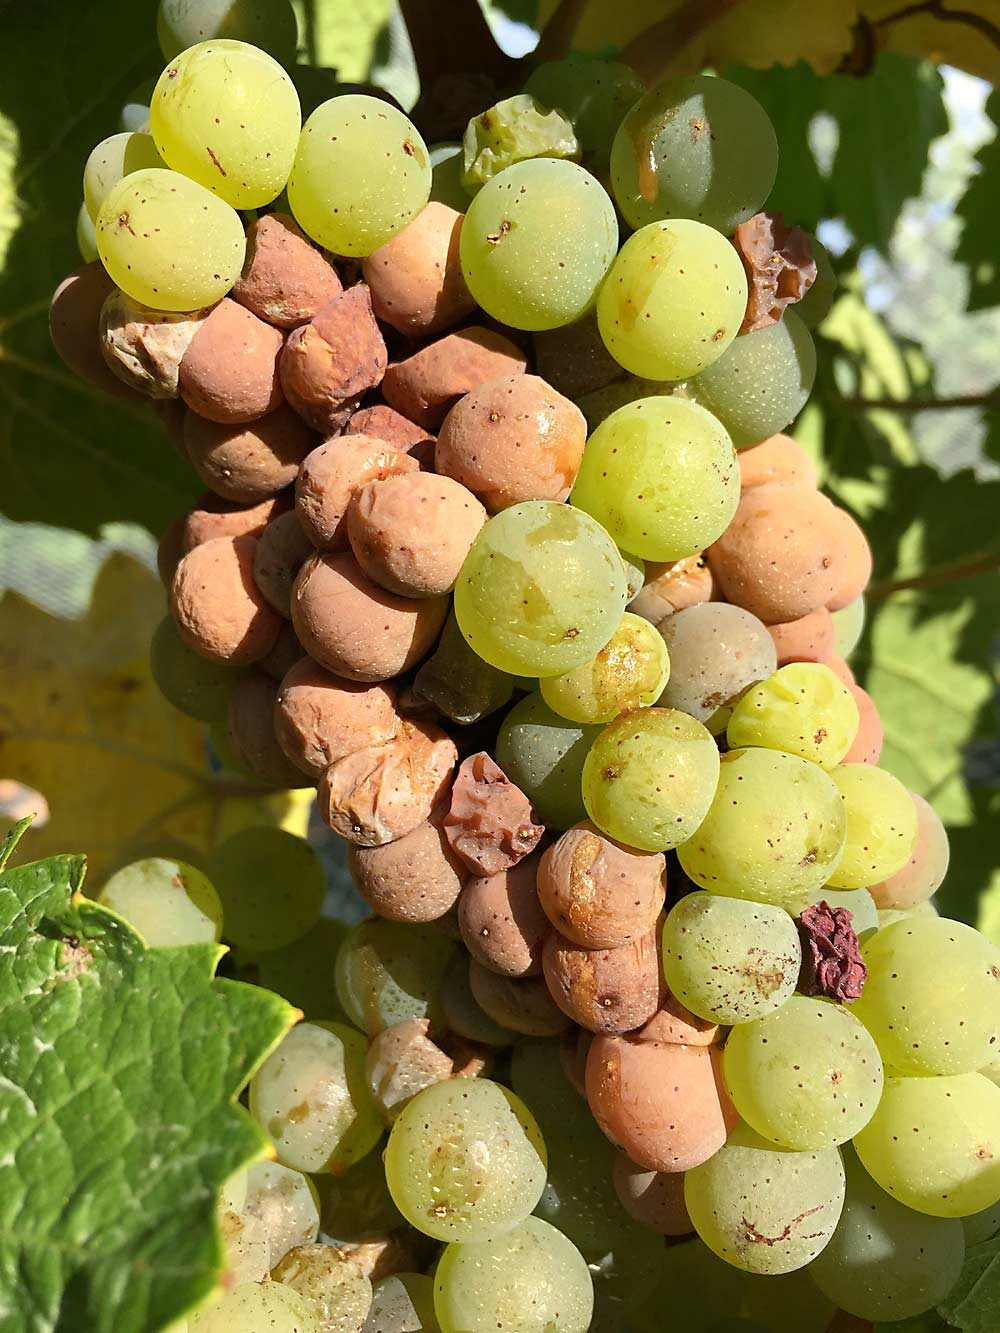 Berriedale, Australia, on March 9, 2016.

Grapes hit by sour rot turn brown and become vinegary. Recent research is shedding light on this previously little-understood disease, which is all too common in cool-climate wine-growing regions around the world. (Courtesy Megan Hall/University of Missouri)